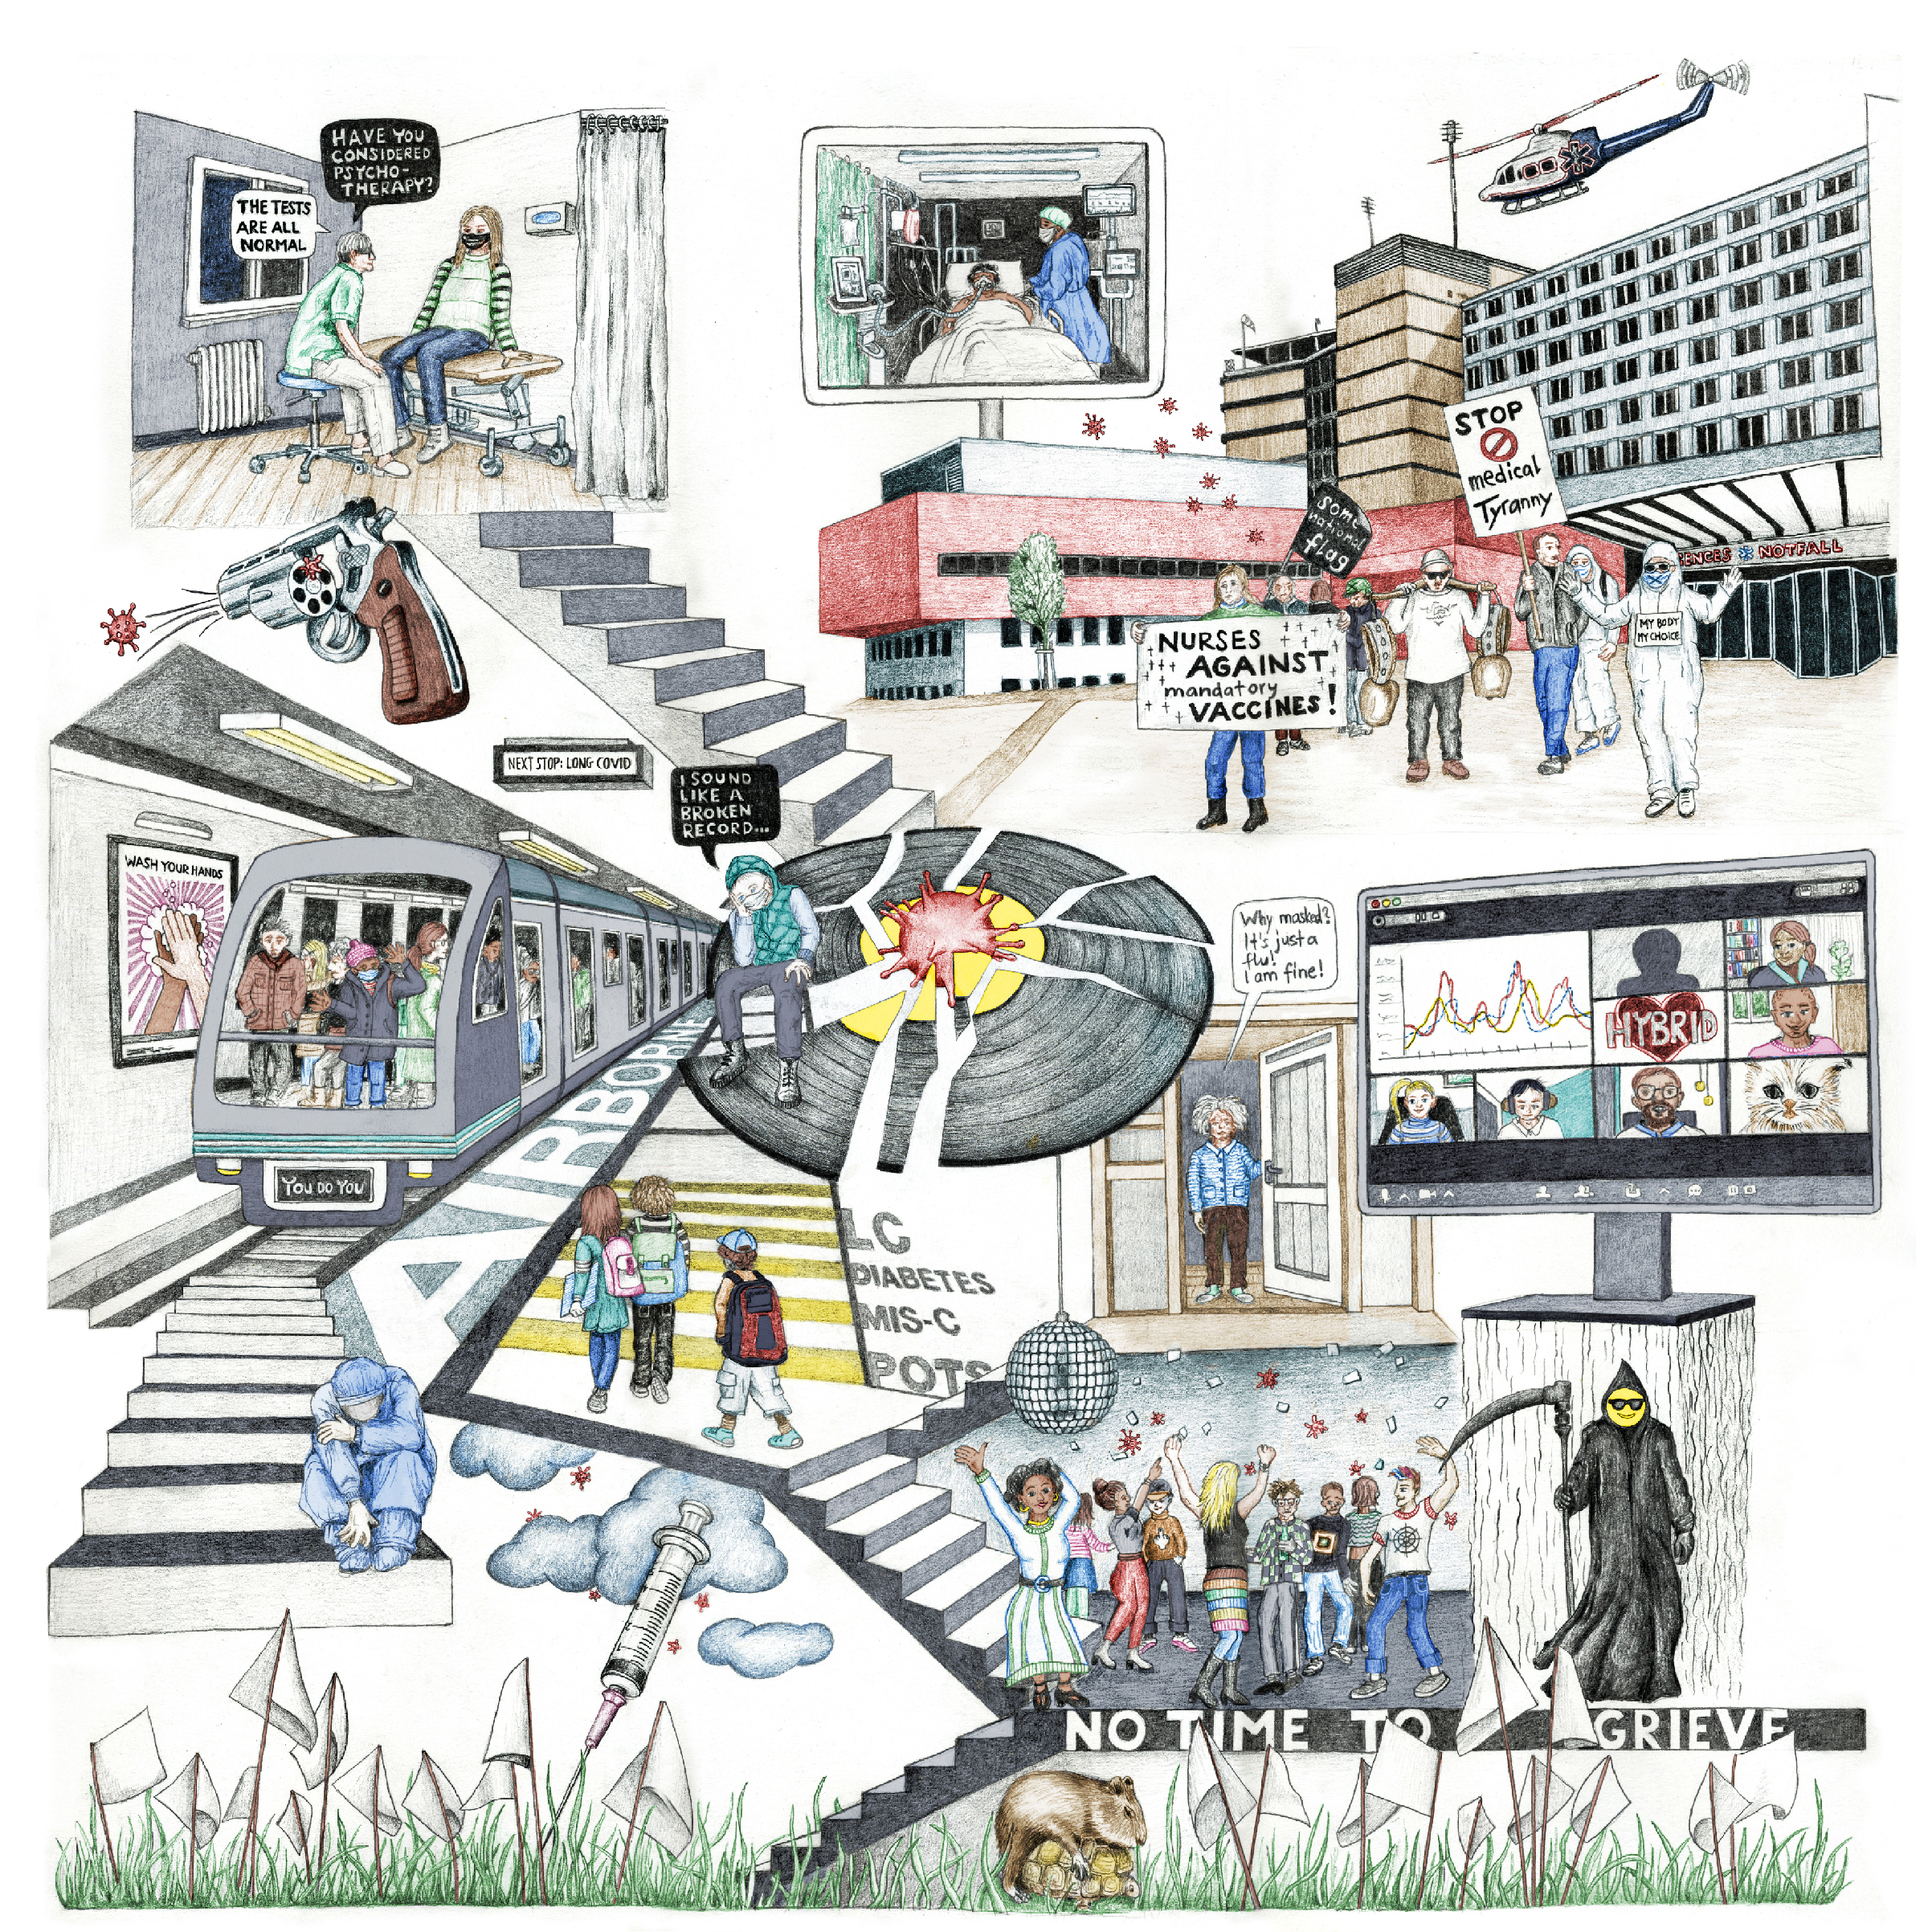 The colored drawing is a wimmelbild showing various scenes from the ongoing pandemic. At the center there is a huddled person who sits on a broken record, saying "I sound like a broken record". At the top right there are scenes from a anti-vaxx-protest in front of a hospital. On a screen a person in a hospital bed on a respirator can be seen. At the top left corner there's a doctor without a mask leaning into a patient, who seems intimidated. Right underneath a revolver points away, 5 chambers are empty one contains a COVID virus, to signify the russian roulette of Long COVID. In the bottom left corner there's a train station with an incoming train called "you do you", most people in the train don't wear a mask except one person squeezed to the window. The sign reads "next stop: Long COVID". Bellow there's a syringe with a drop. Above to the right a group of kids tries to cross the street, on the crossing are written "LC, diabetes, MIS-C and POTS". To the right of it there's a dance party where no one wears a mask and death stands there with a smiley head. On the side of the floor is a panel that reads, "no time to grieve". Bellow that there's a capybara relaxing on a turtle, next to the flags of a pandemic memorial. Above the dance floor a woman with wild hair opens the door and asks, "Why masked? It's just a flu. We're fine". On a screen there's a video-chat where one person has a cat face.